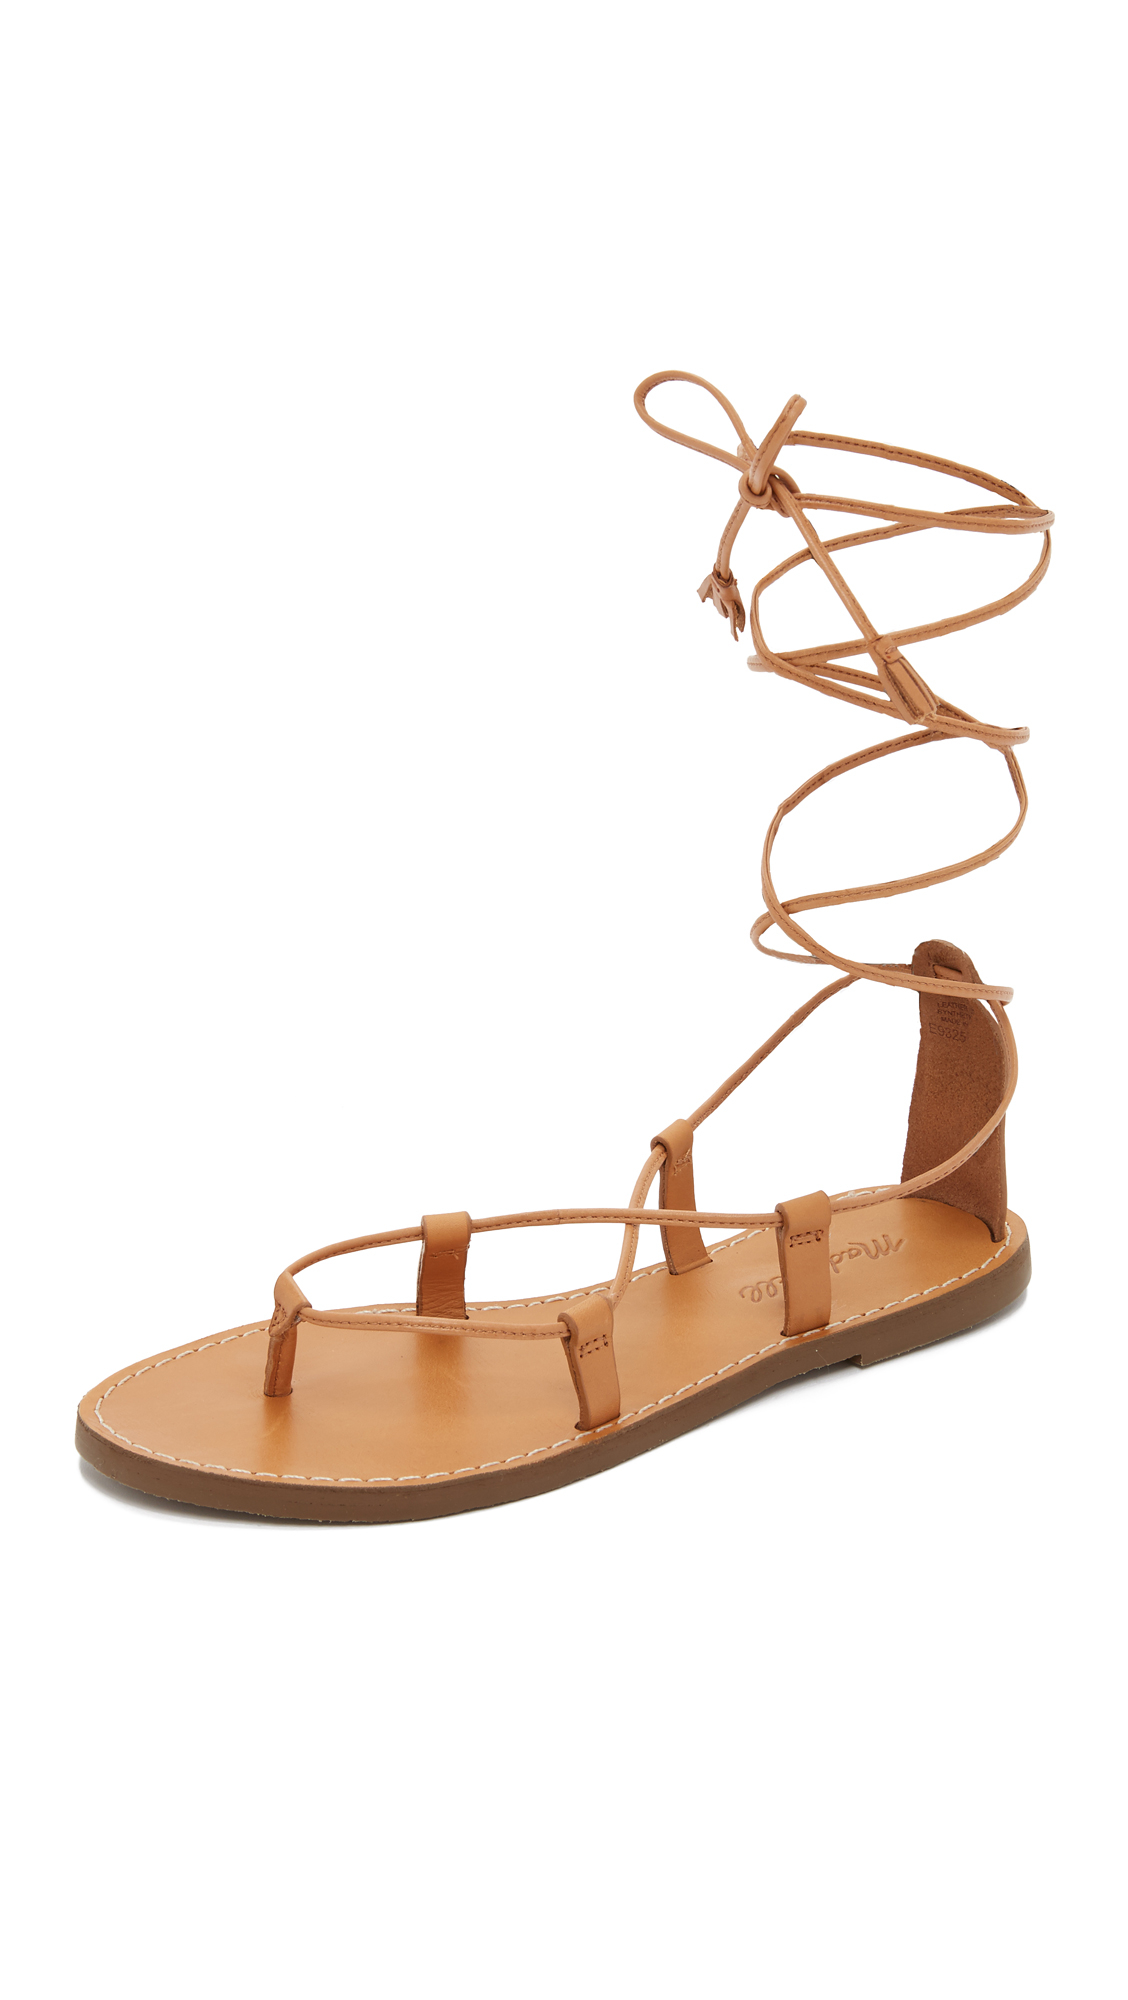 Madewell Kana Lace Up Gladiator Sandals in Brown | Lyst